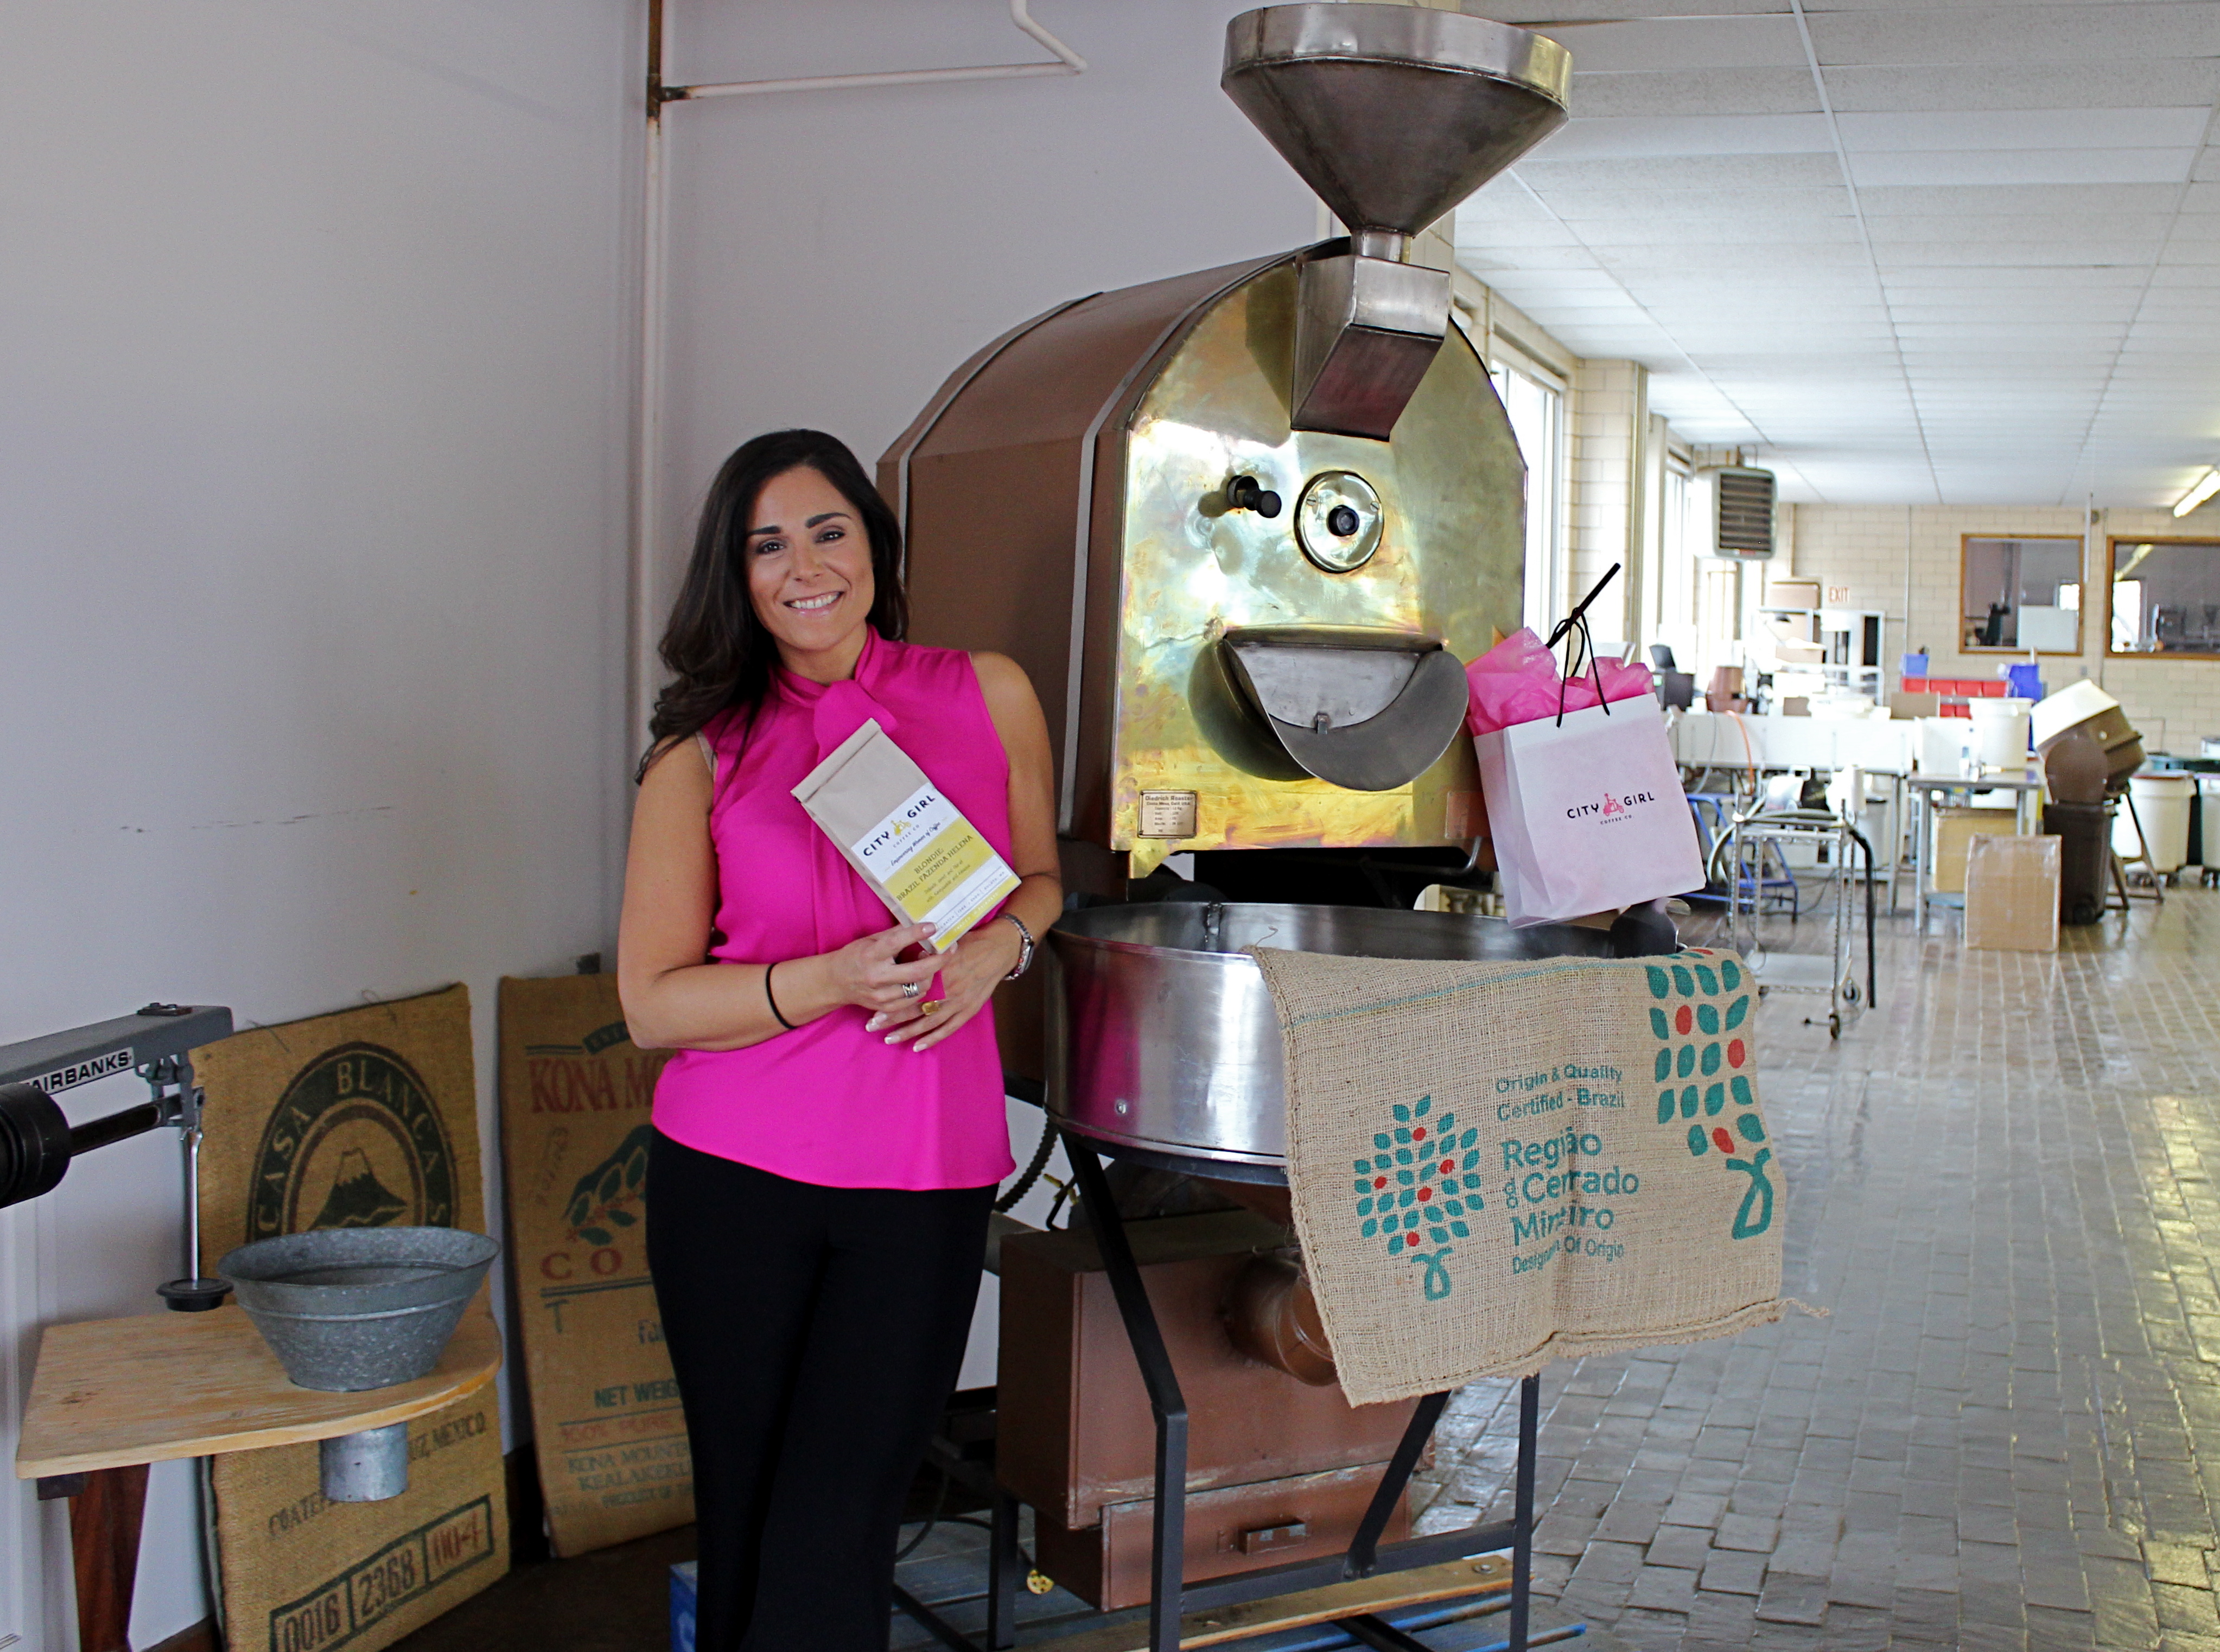 Alyza Bohbot poses in front of Alakef's original roaster with City Girl Coffee swag